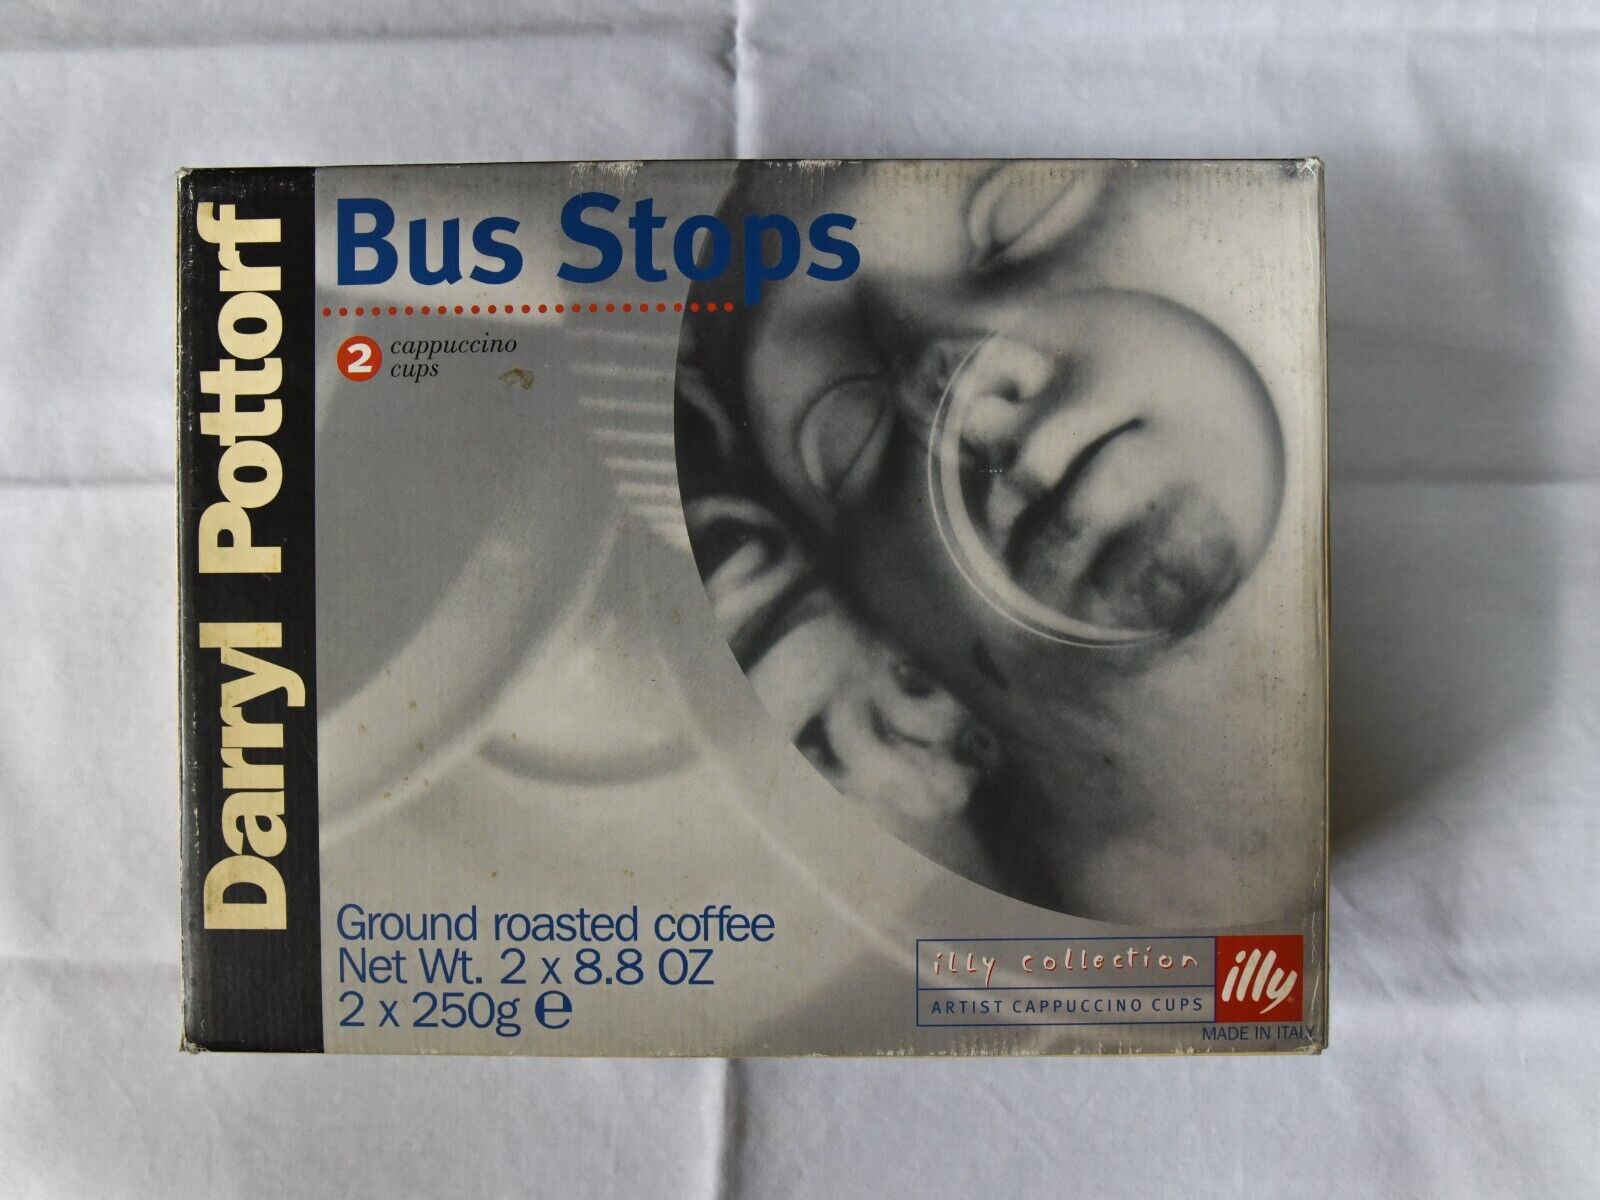 Illy DARRYL POTTORF BUS STOPS CAPPUCCINO Art Collection 1999  2 cups and saucers